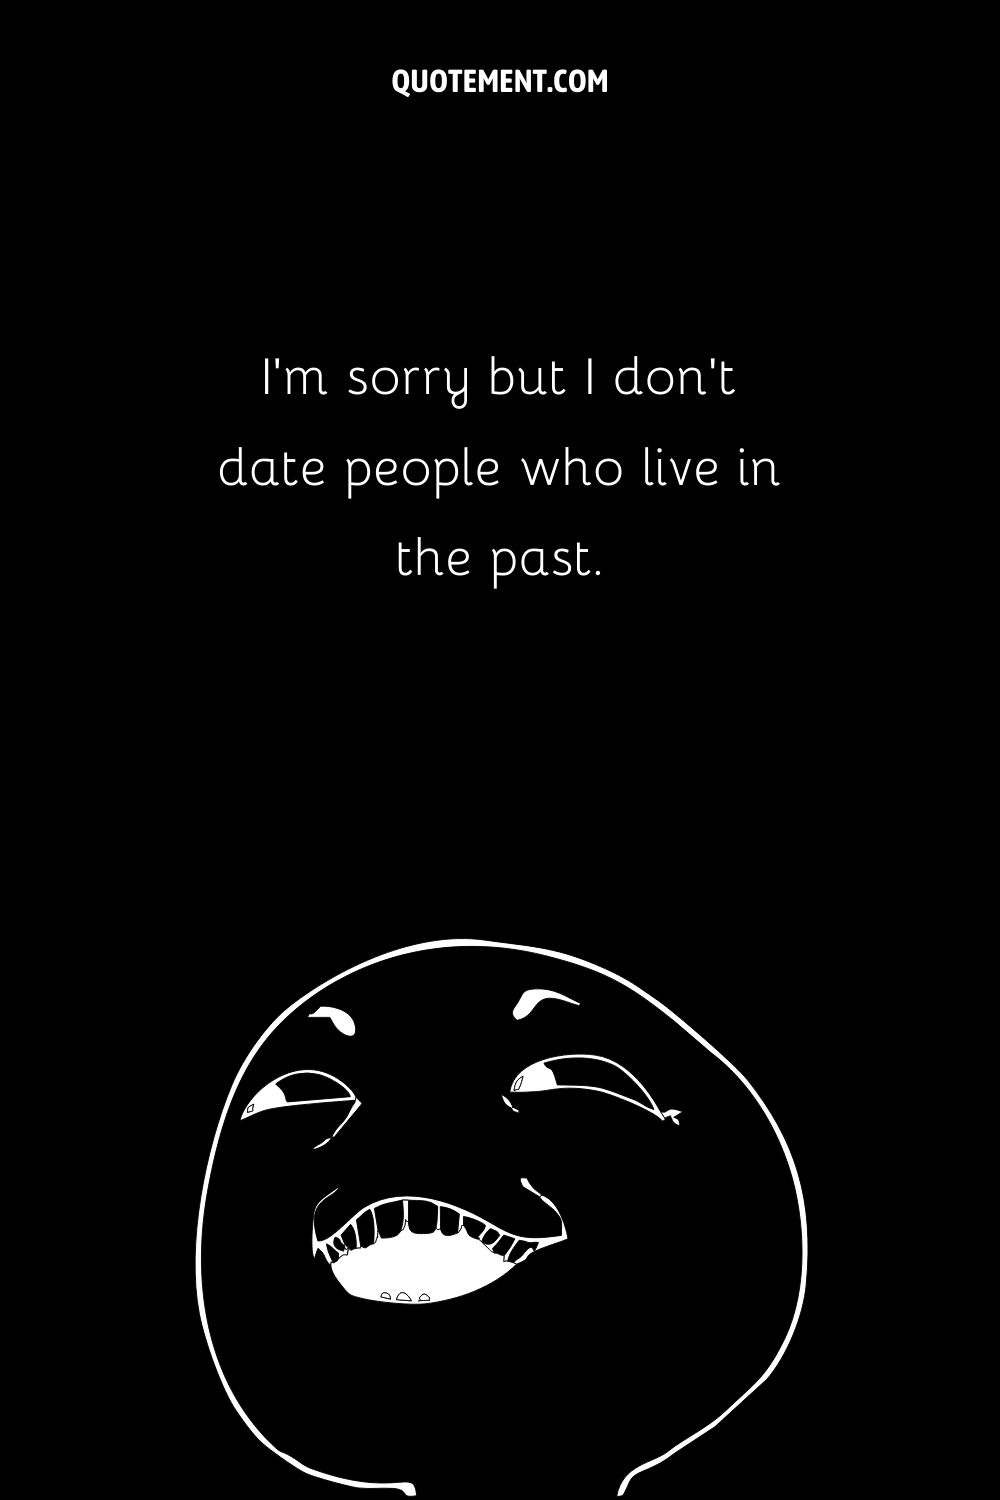 I’m sorry but I don’t date people who live in the past.